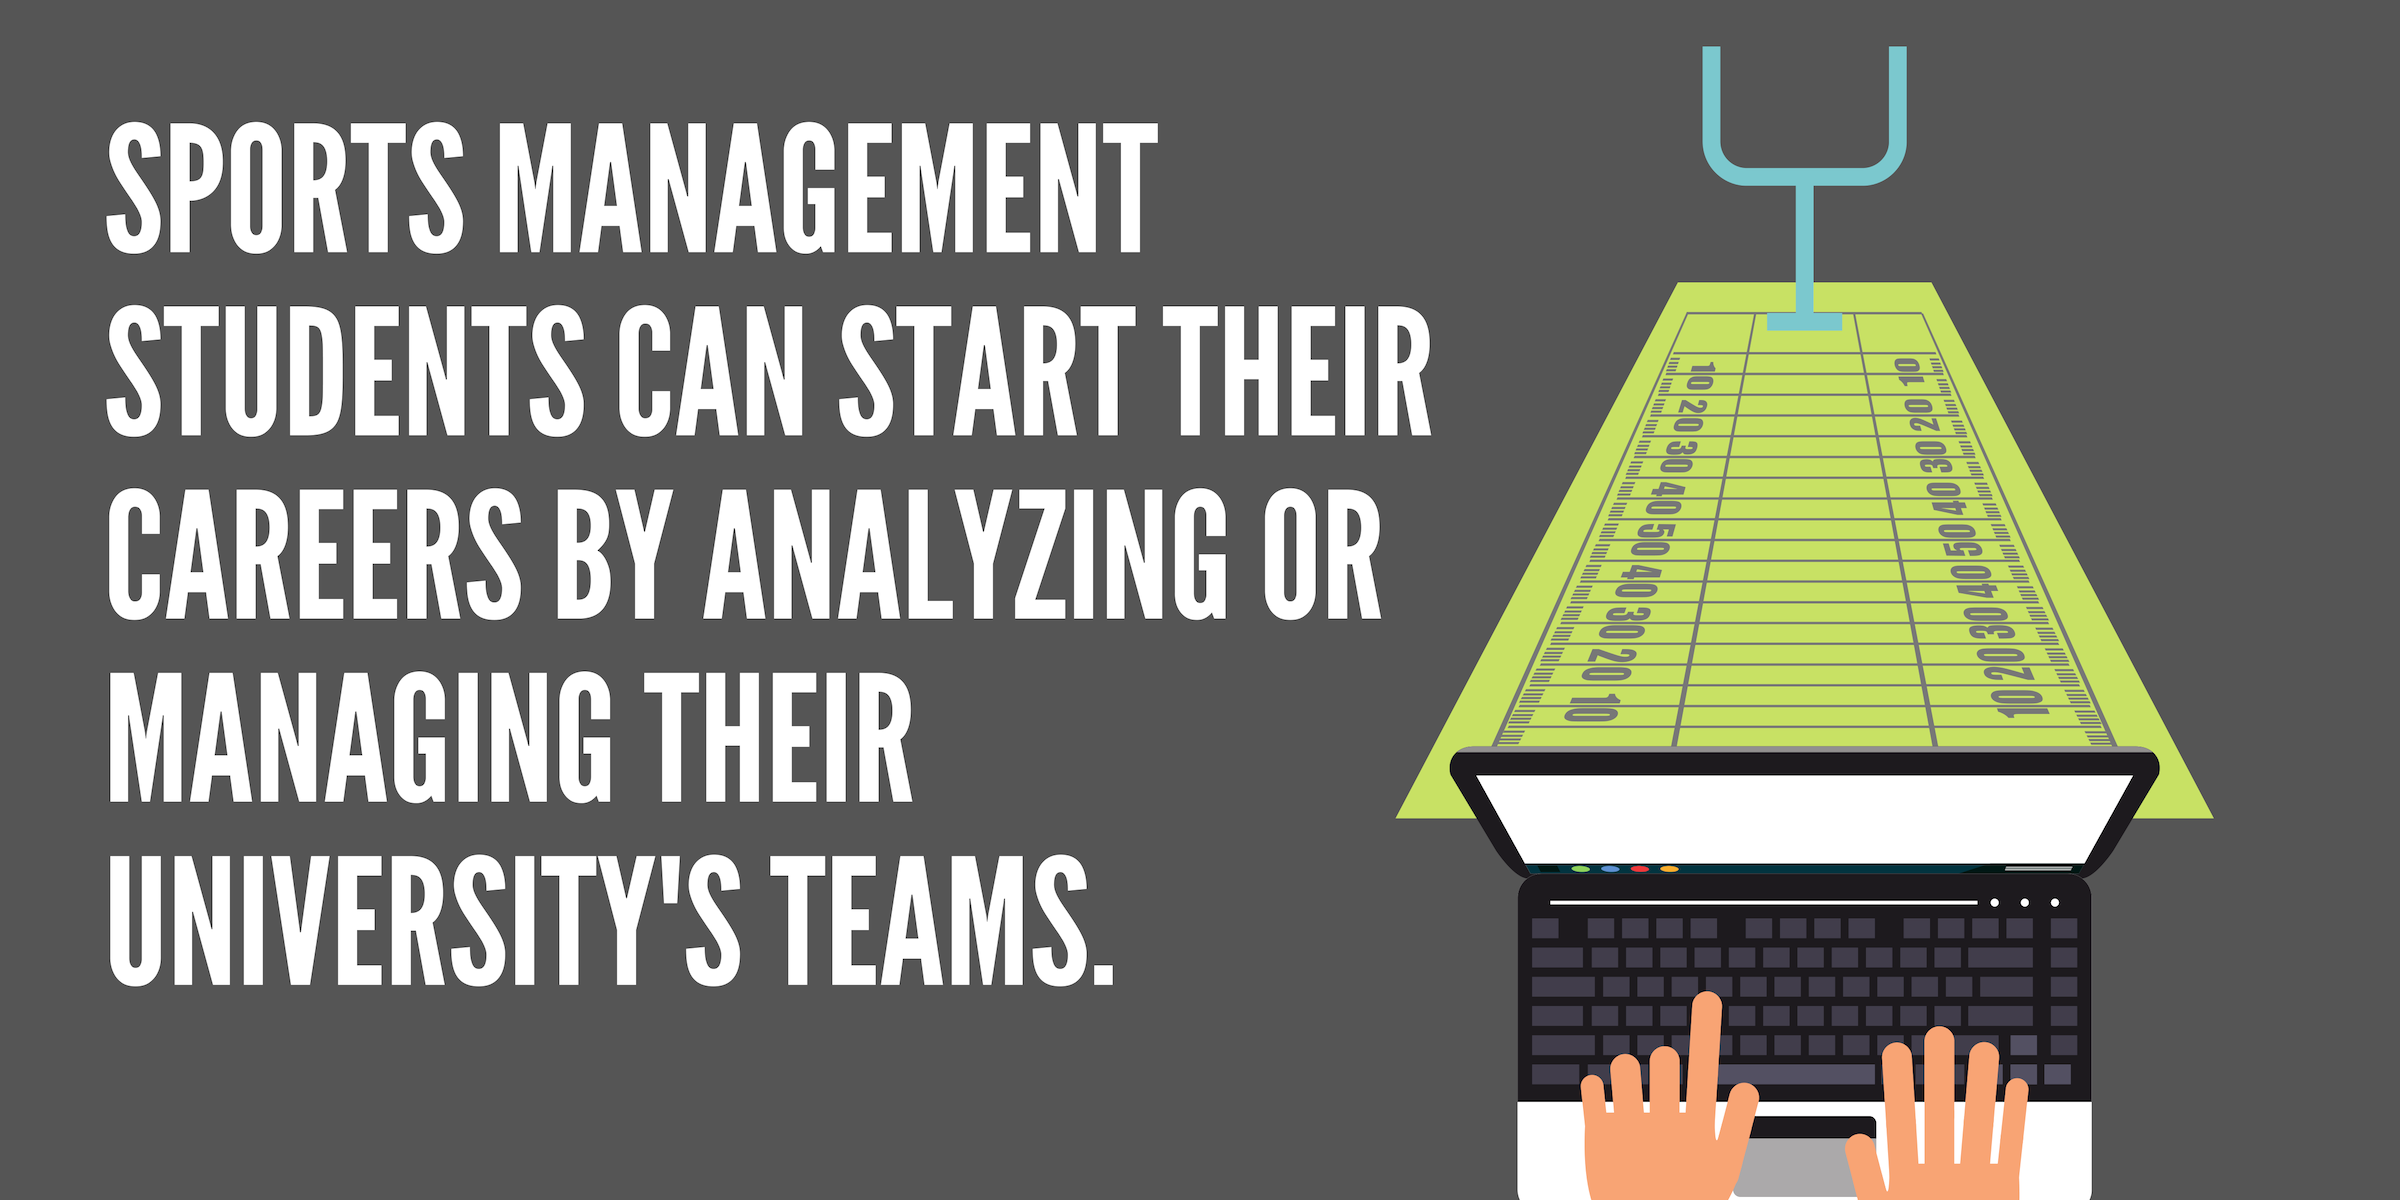 Sport management students can start their careers by analyzing or managing their university's teams.